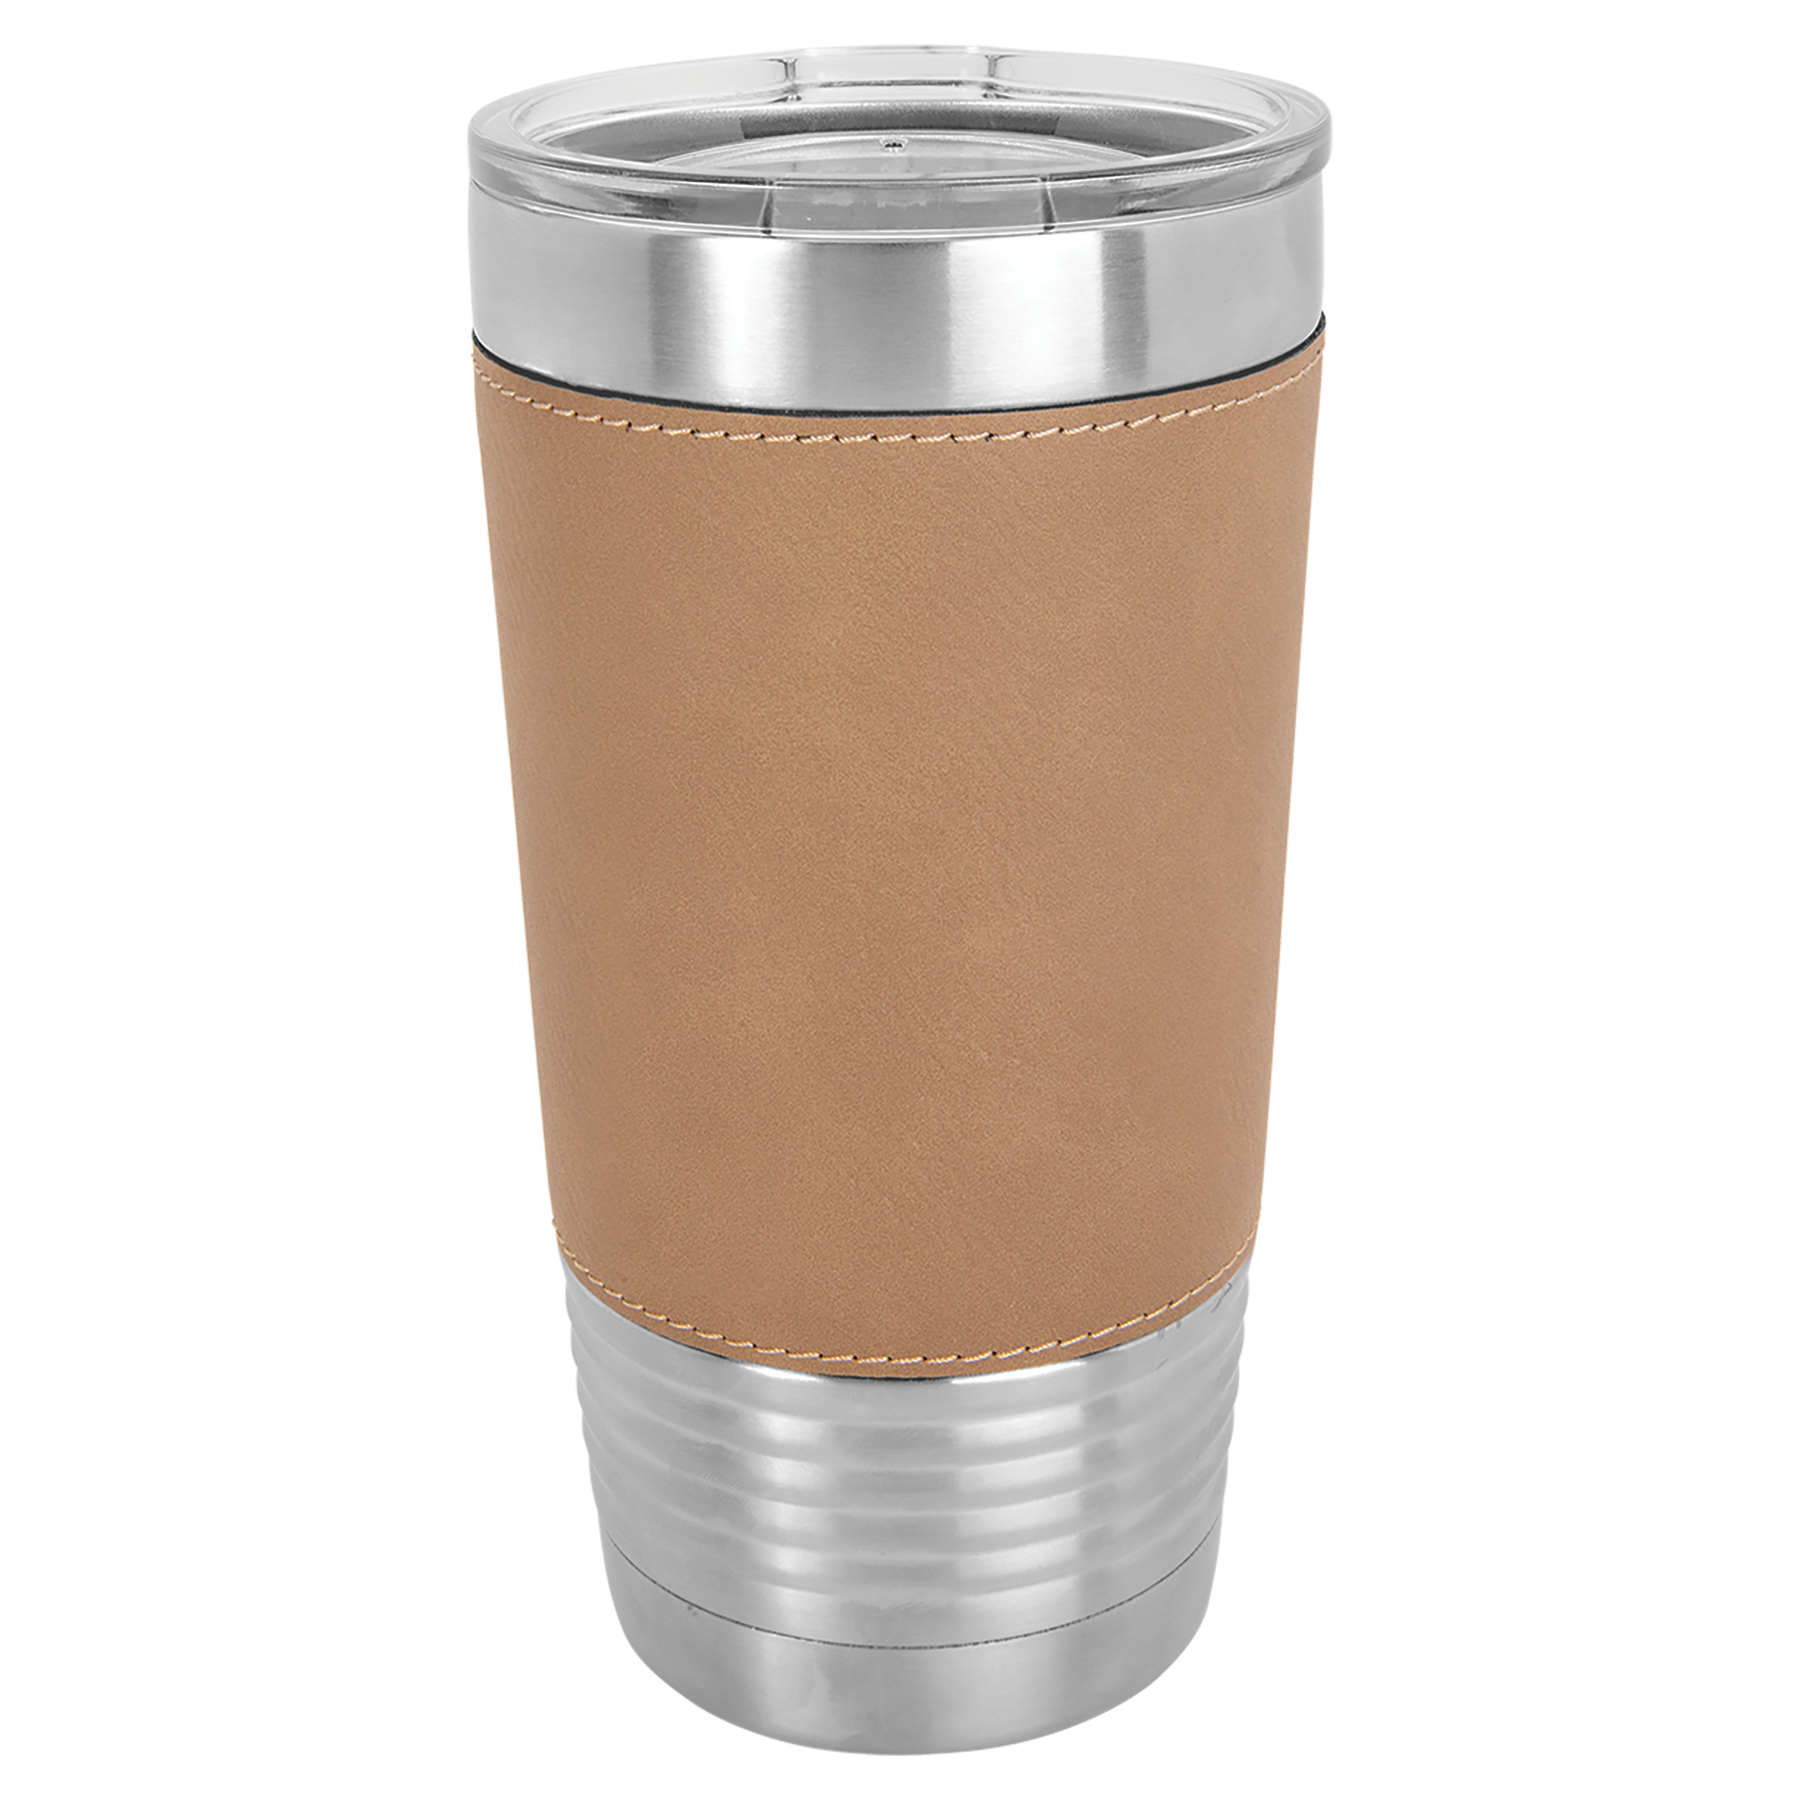 Light Brown Leatherette Engraves to Black 20oz Tumbler-One Free Engraving   -Double-wall Vacuum Insulated  -Made from 18/8 Gauge Stainless Steel (Type 304 Food Grade)  -Lid is BPA Free (Hand Wash Only)  -Not recommended for Dishwasher  -Leatherette Not Removable  -Works with Cold and Hot Drinks  -10 Color Options  -Perfect for Personalized Gifts, Awards, Incentives, Swag & Fundraisers